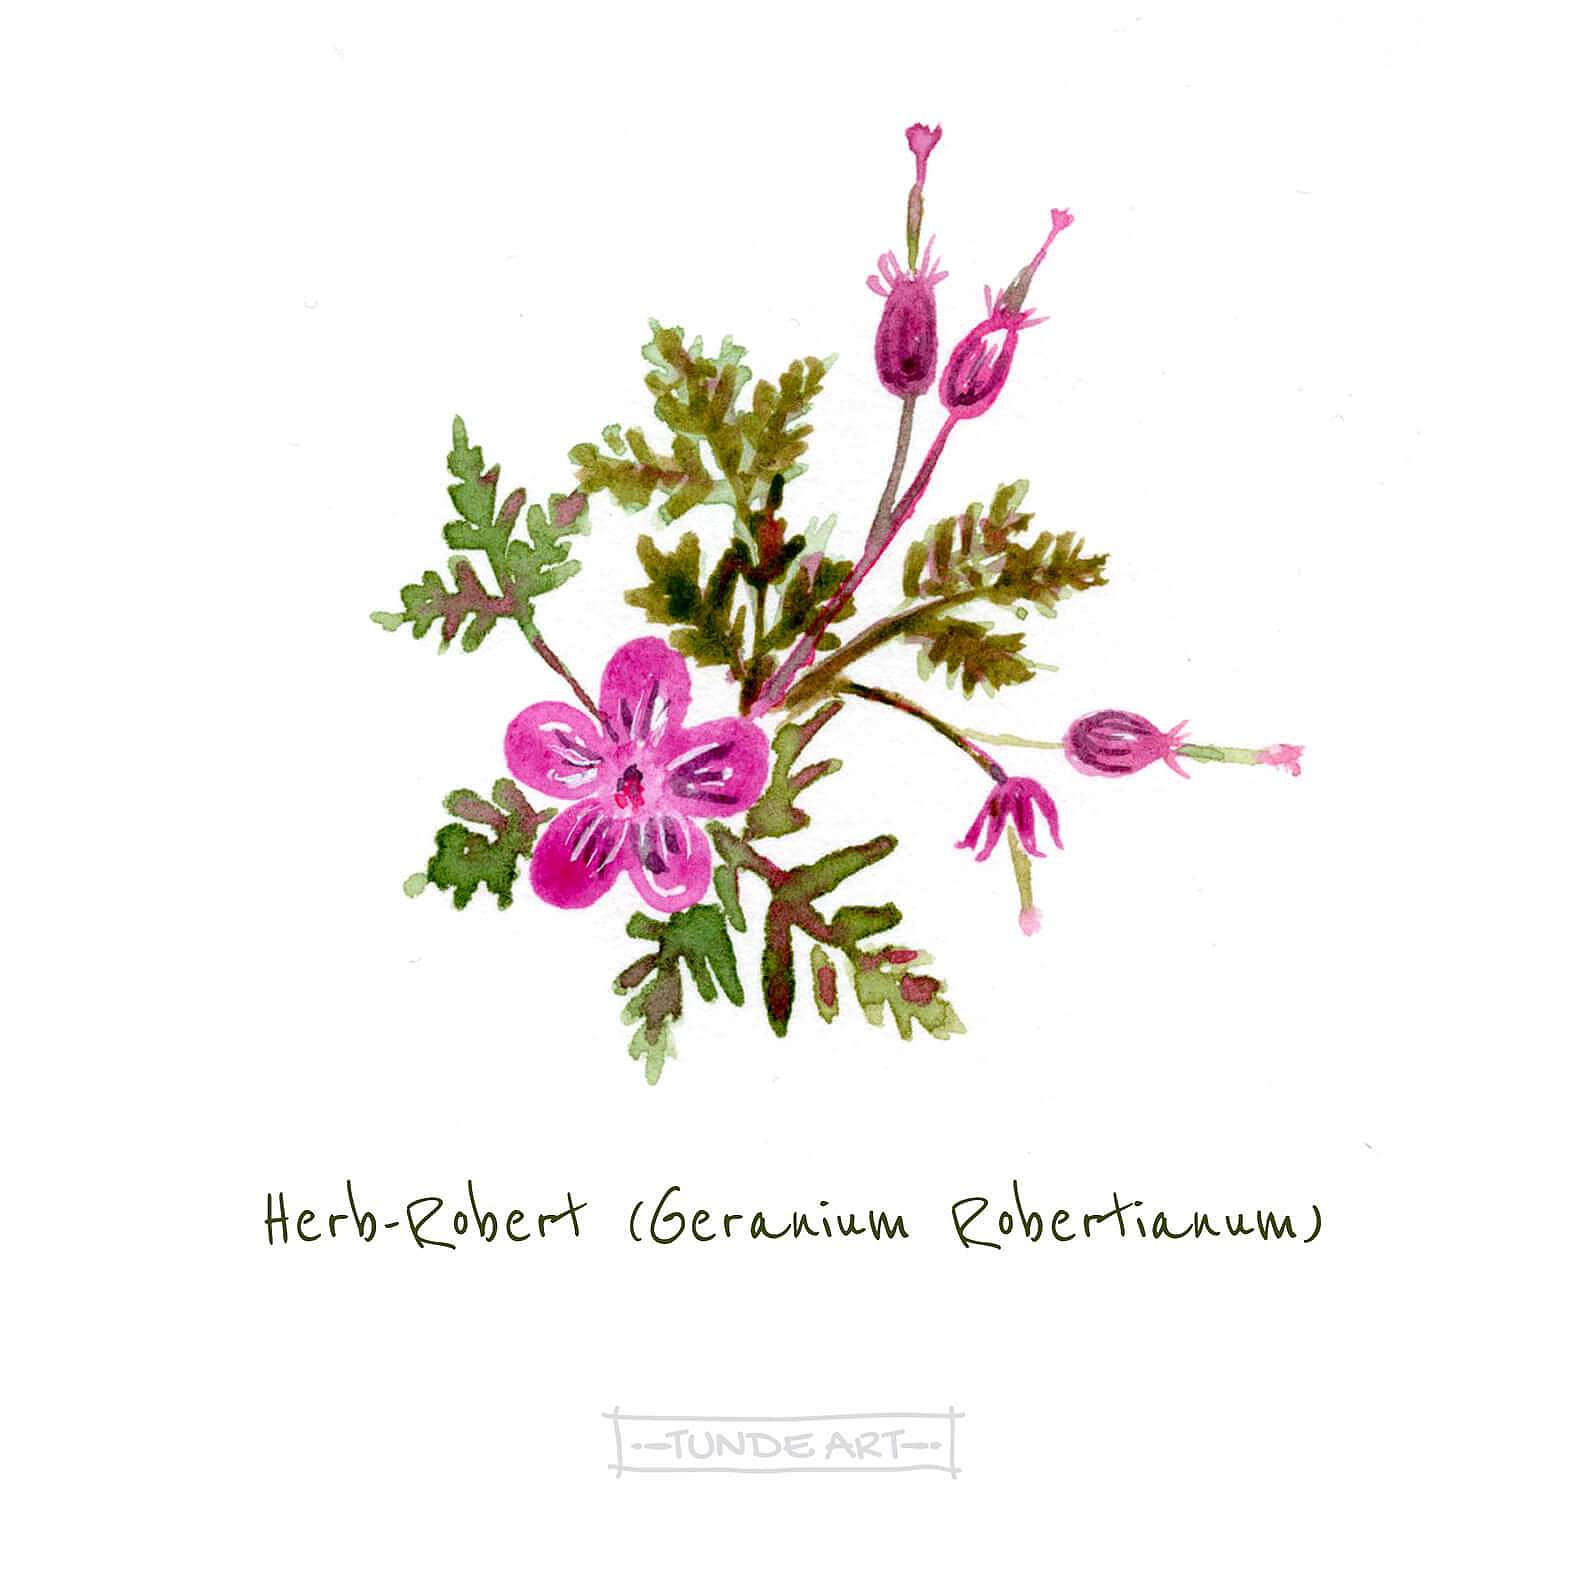 Plant sketch of Herb Robert by Tunde Szentes